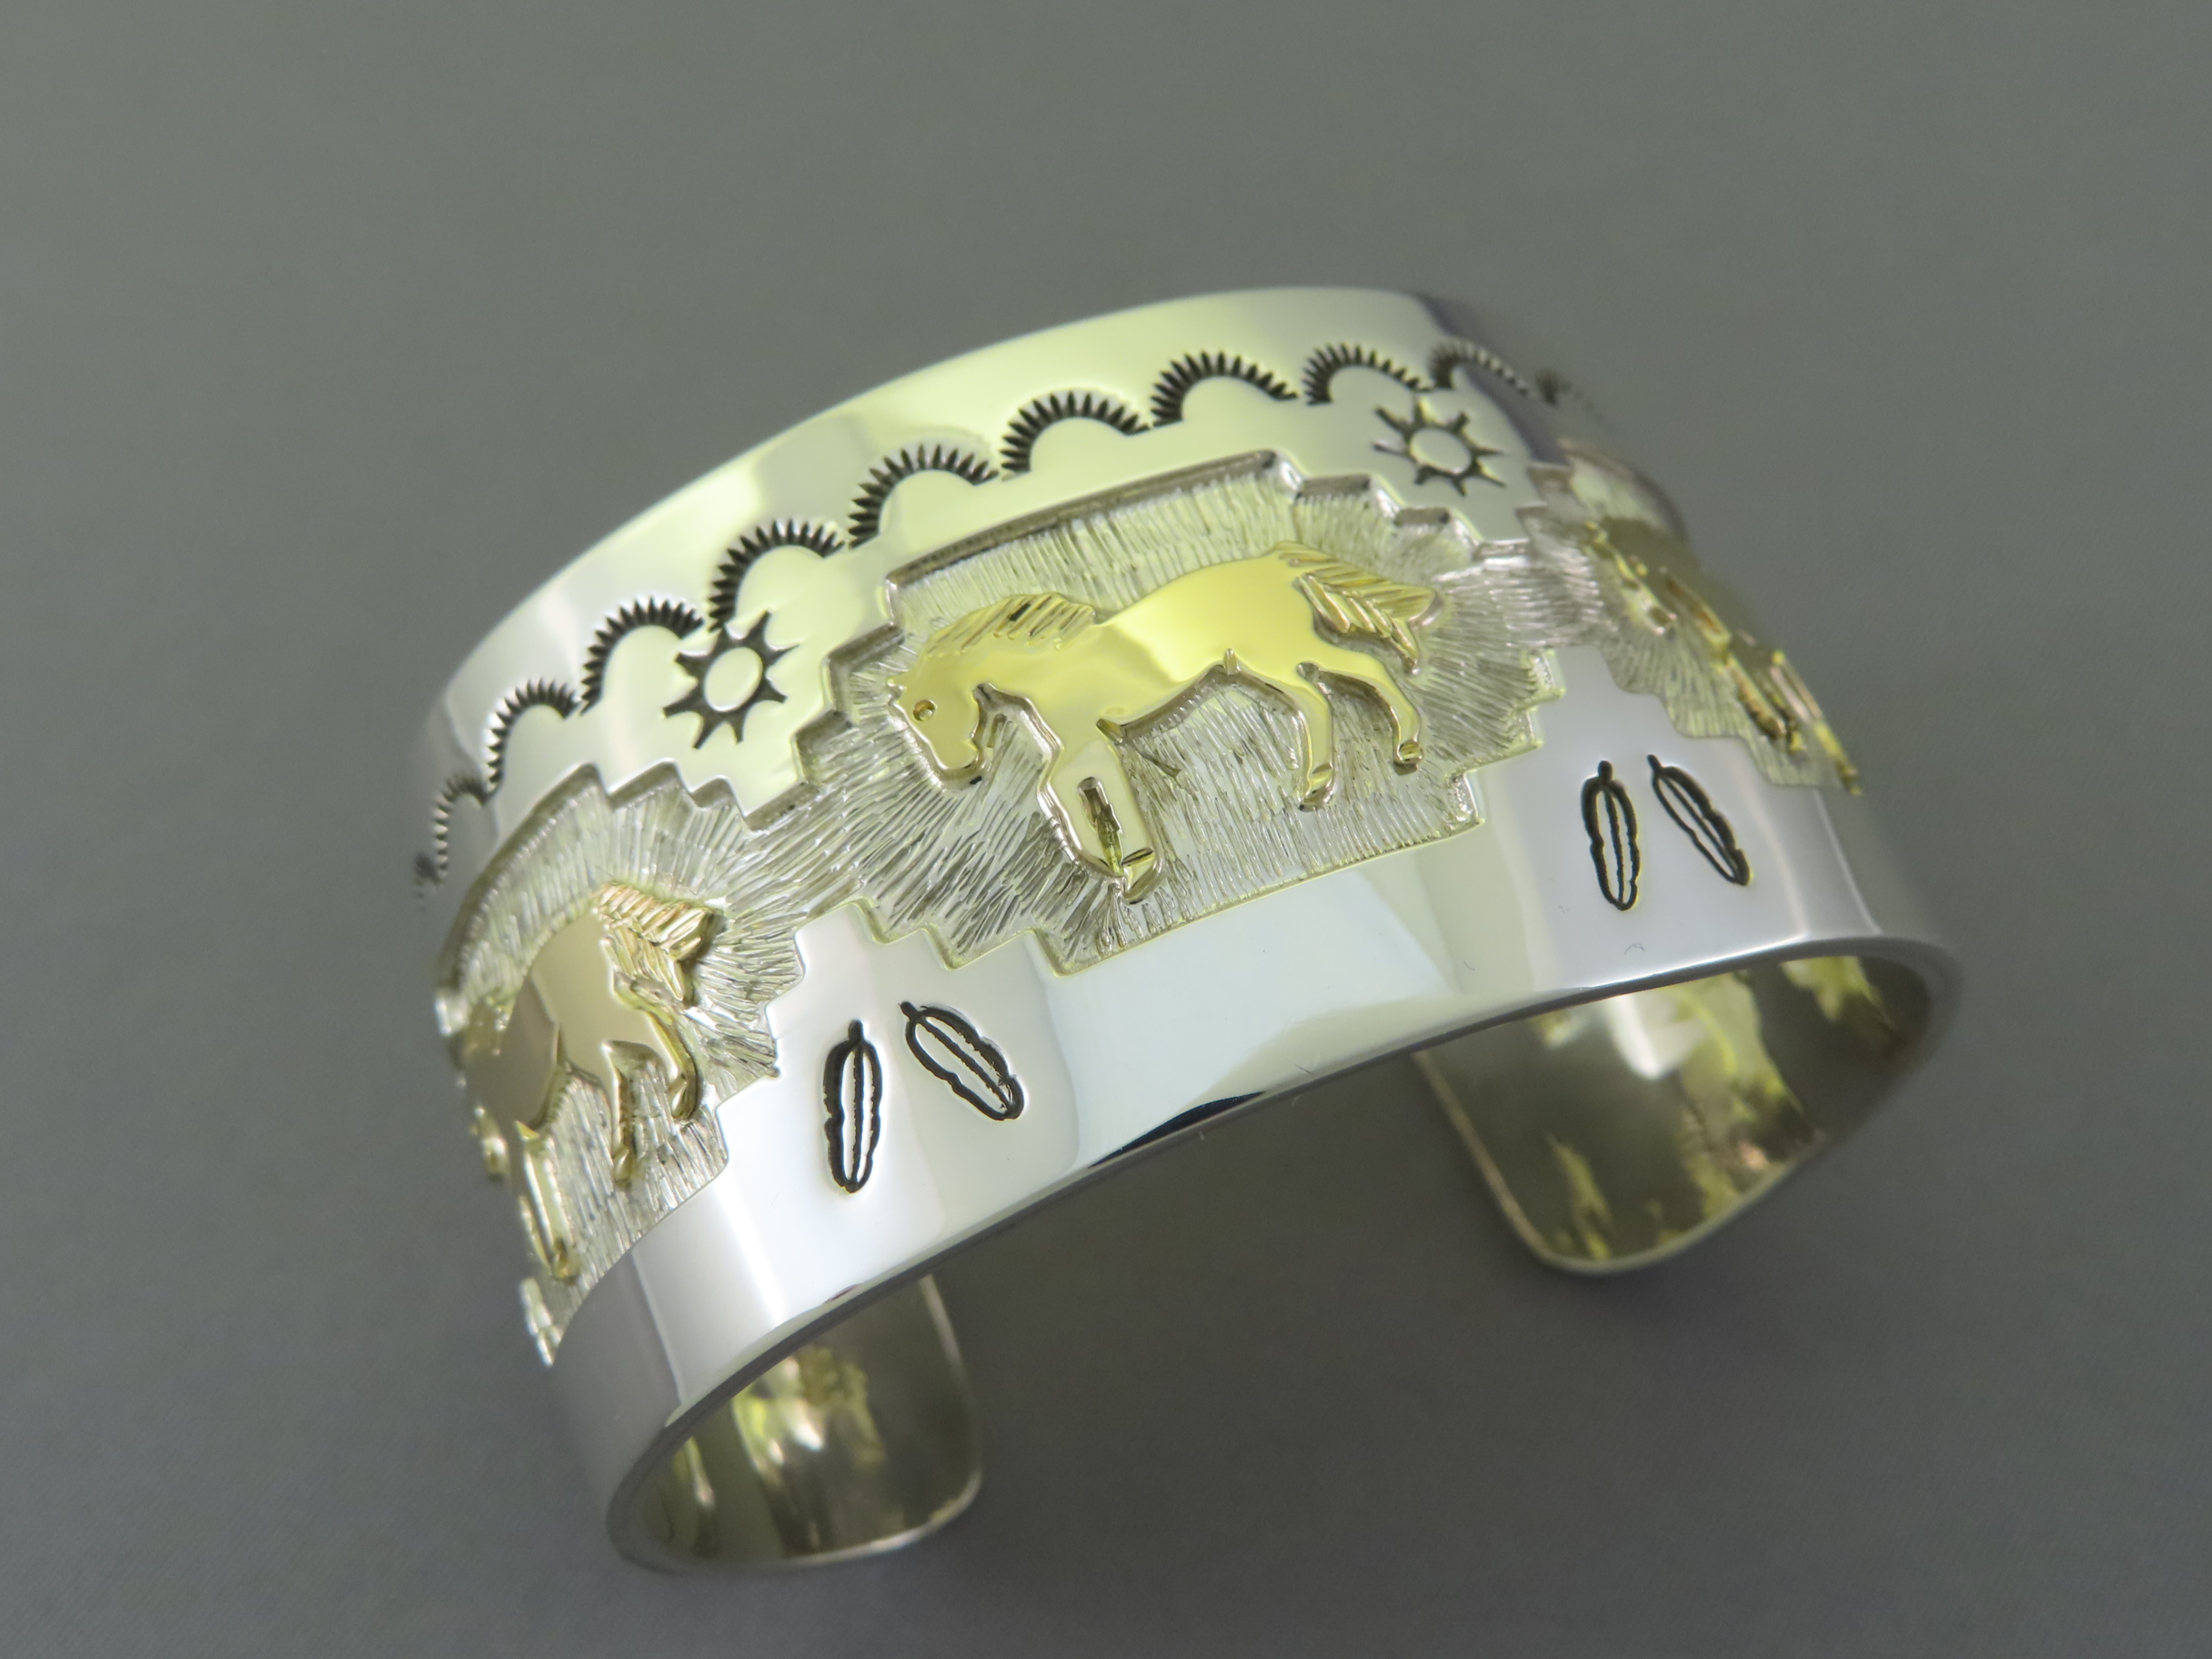 Horse Bracelet - Silver & Gold HORSE Cuff Bracelet by Native American jewelry artist, Fortune Huntinghorse FOR SALE $895-